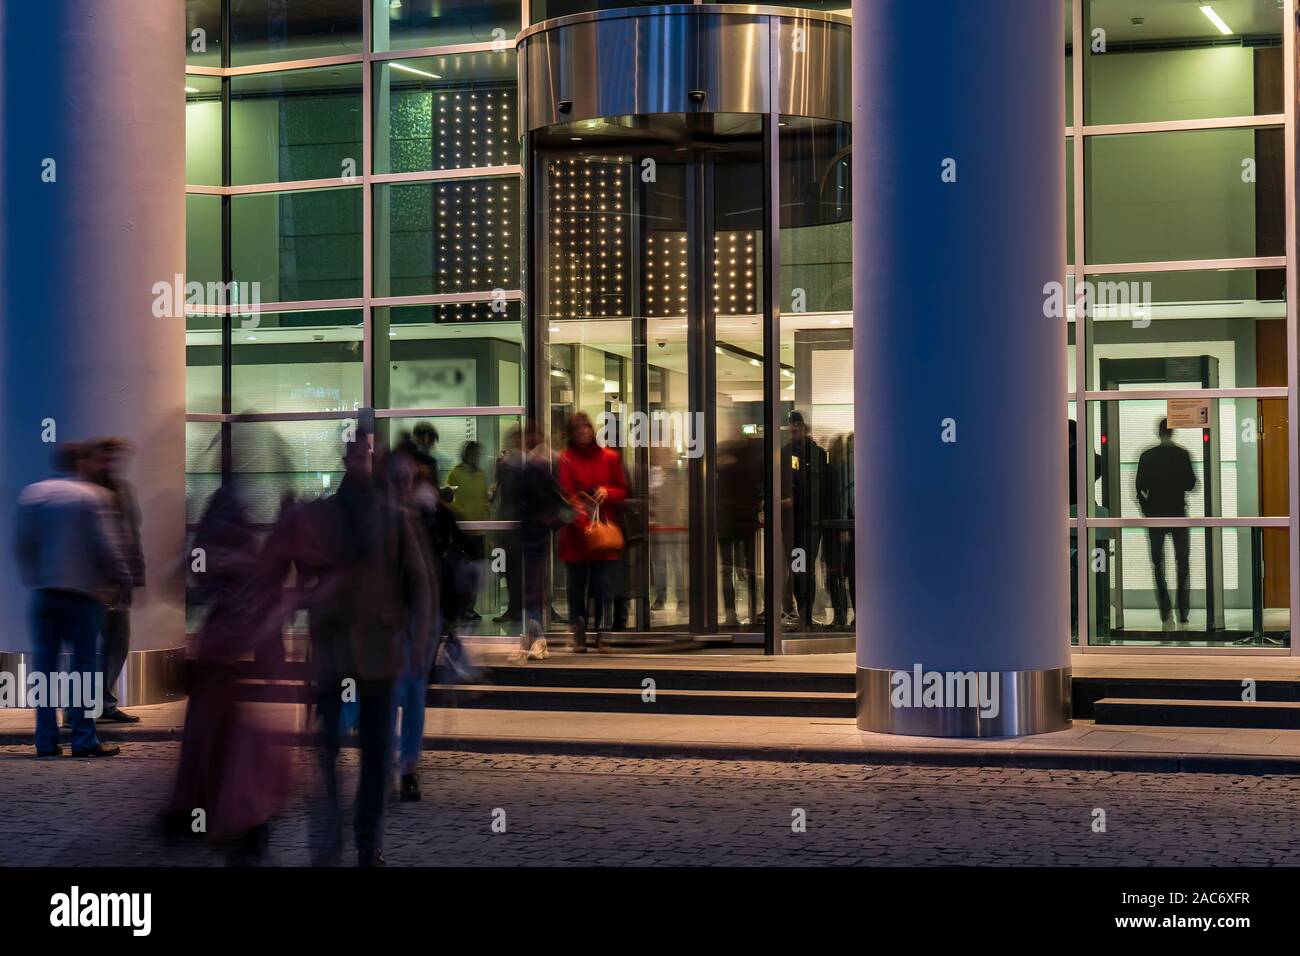 The movement of people at the entrance to modern building Stock Photo